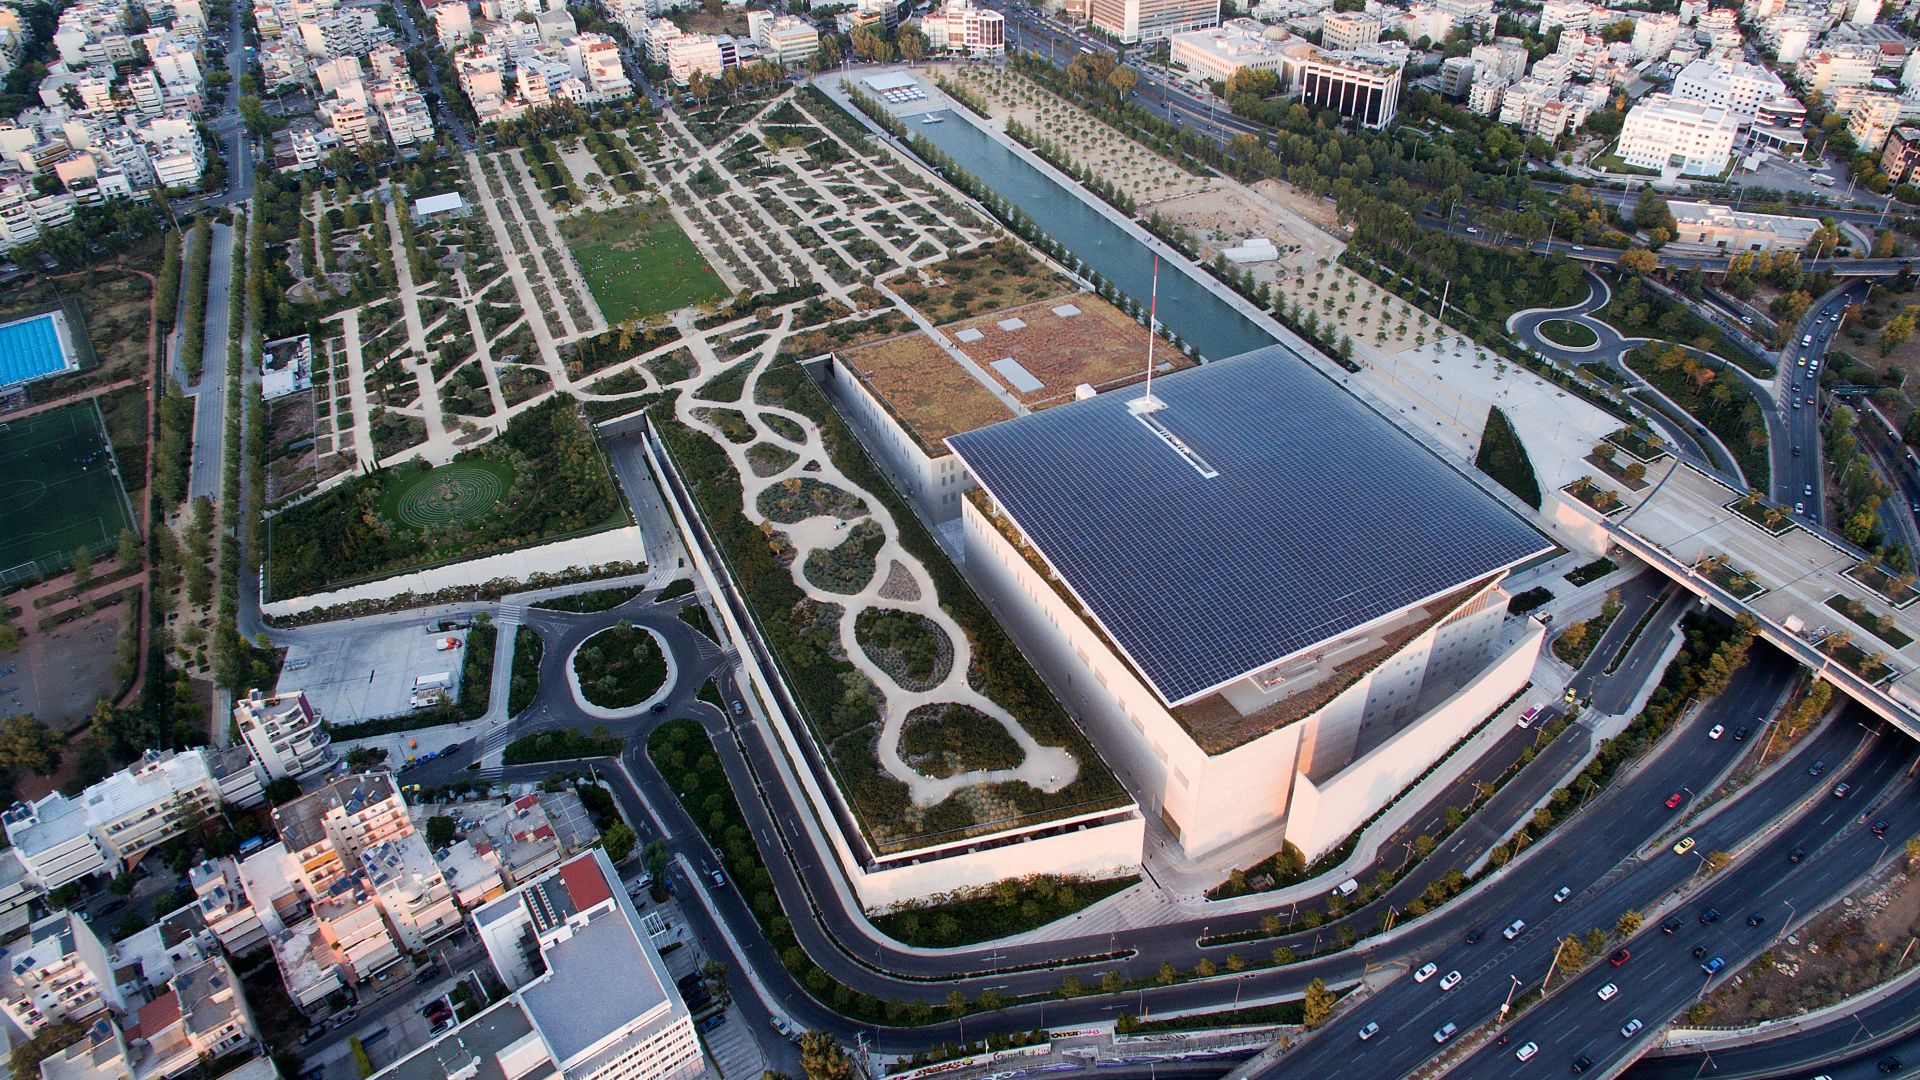 The Stavros Niarchos Foundation Cultural Center from above